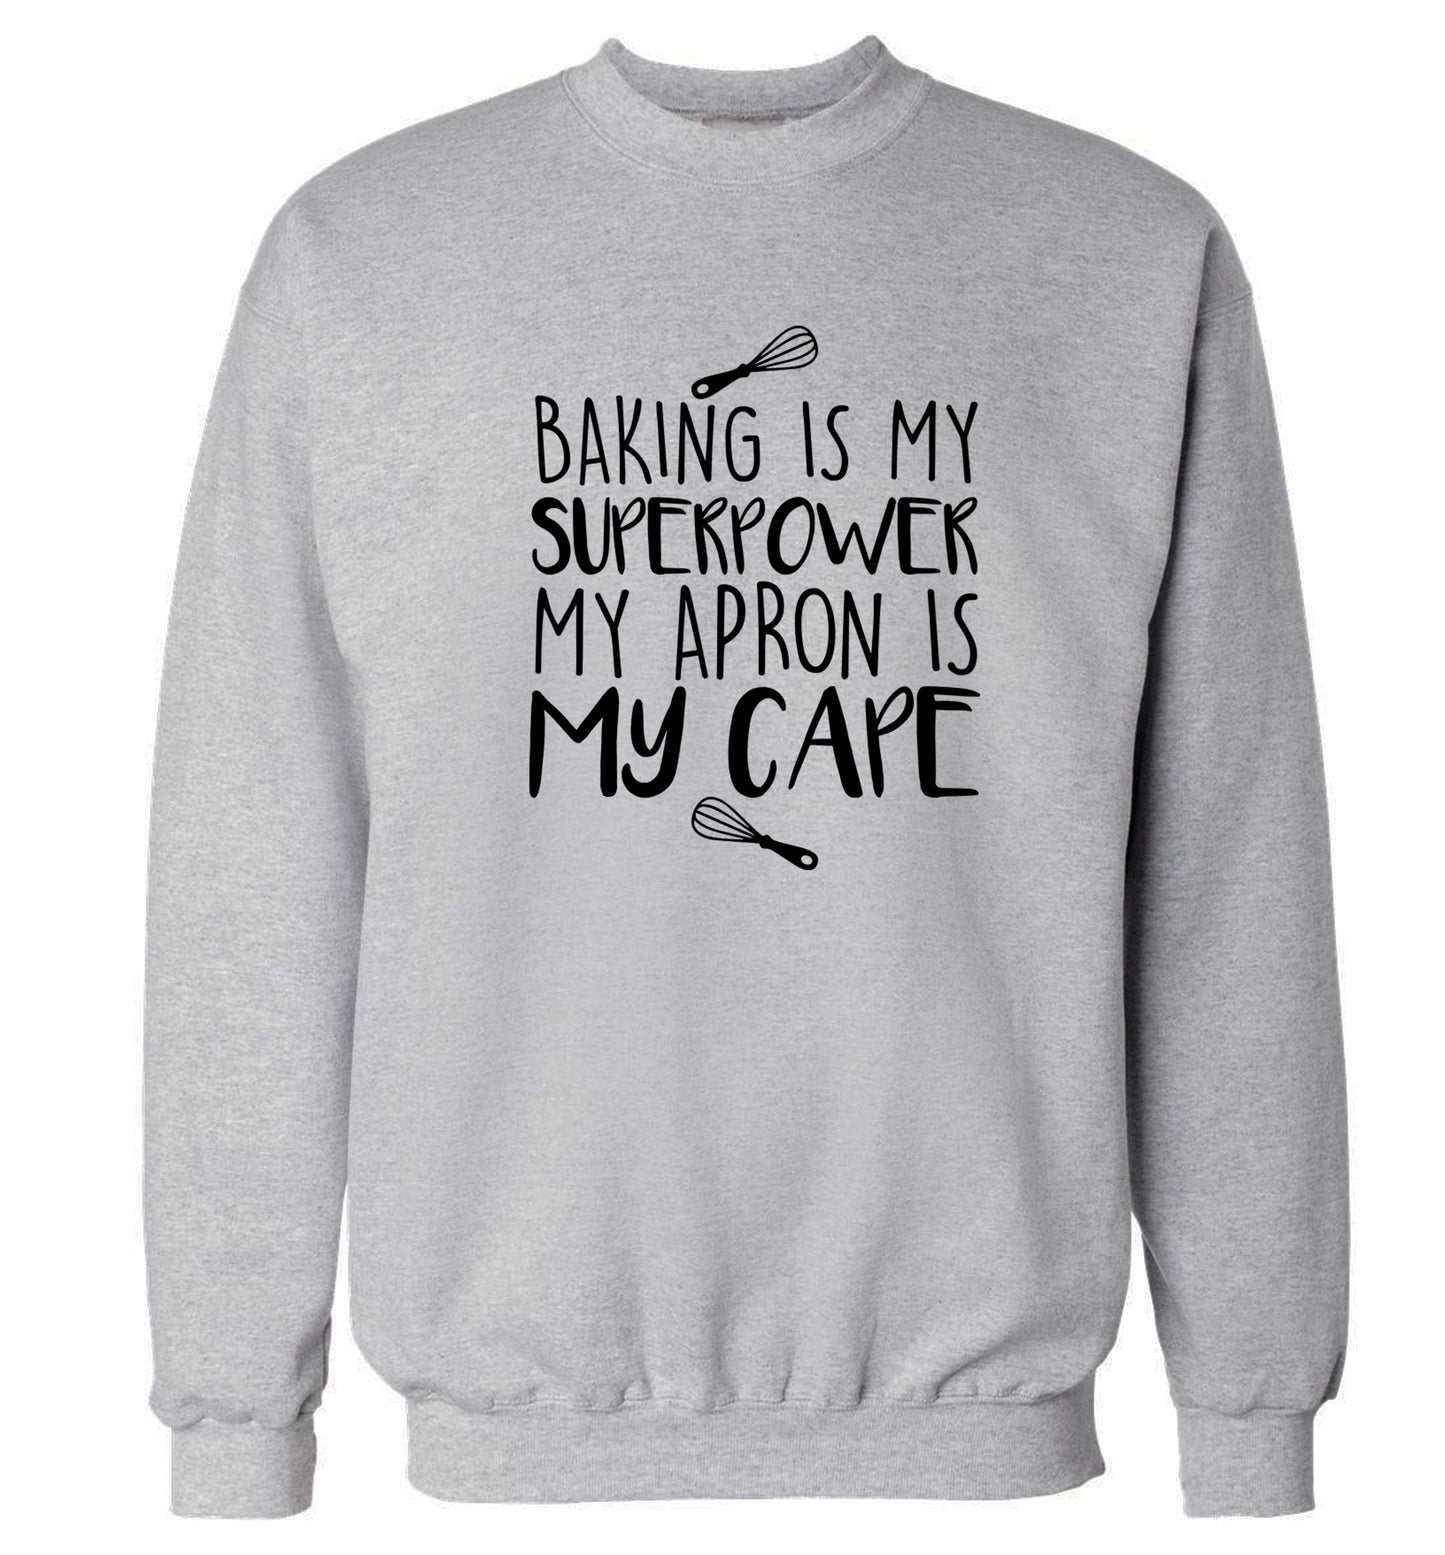 Baking is my superpower my apron is my cape Adult's unisex grey Sweater 2XL